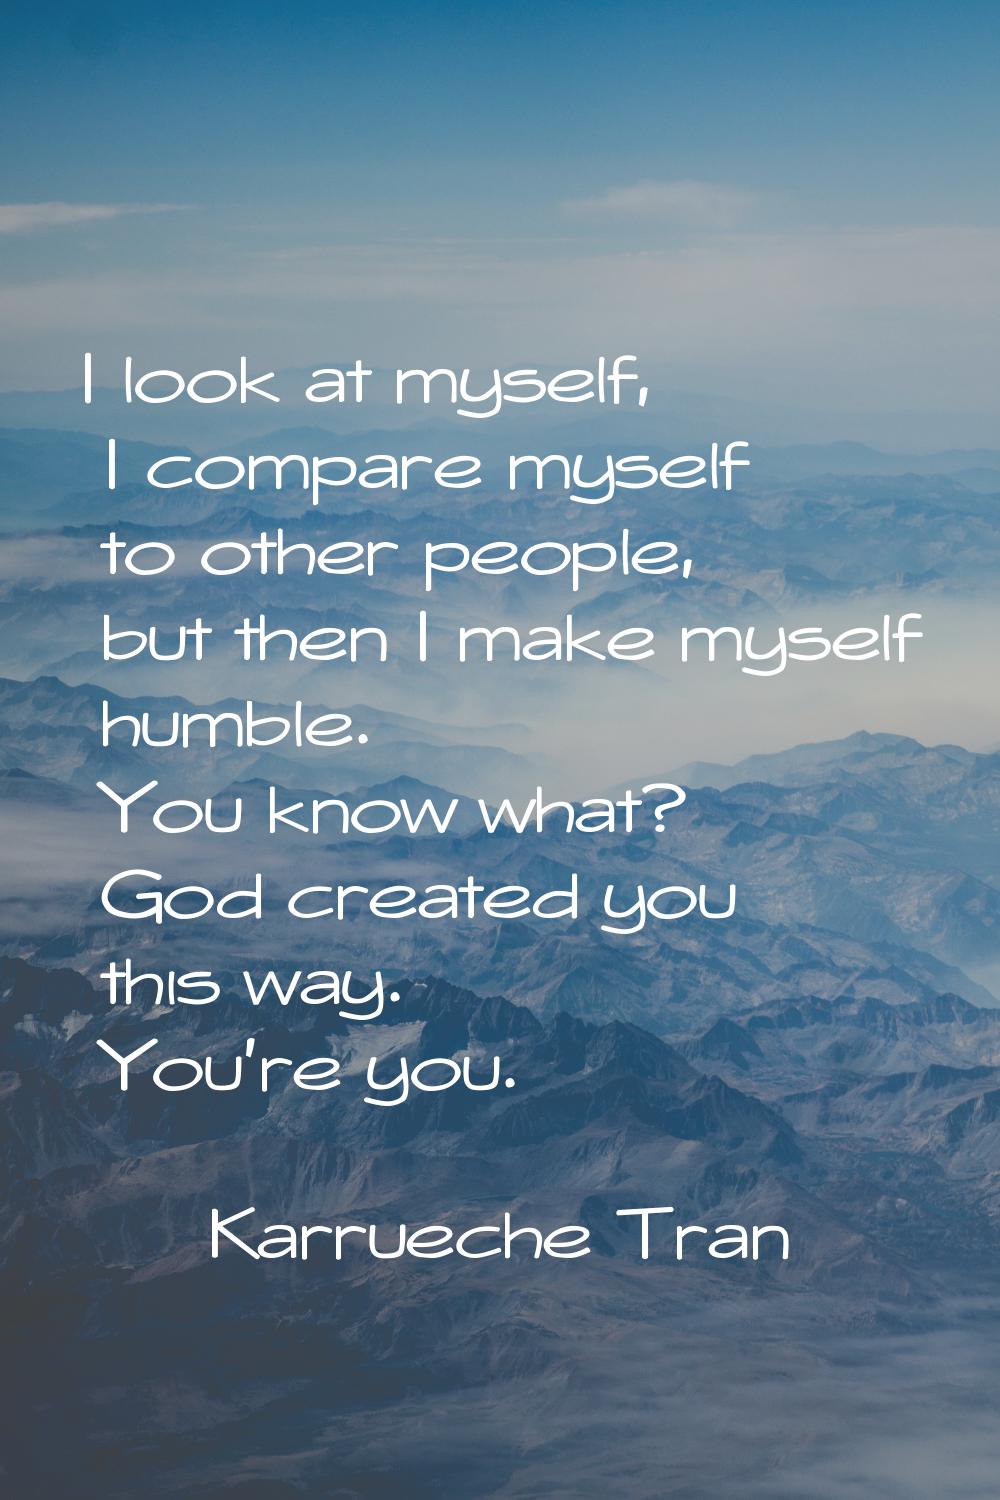 I look at myself, I compare myself to other people, but then I make myself humble. You know what? G